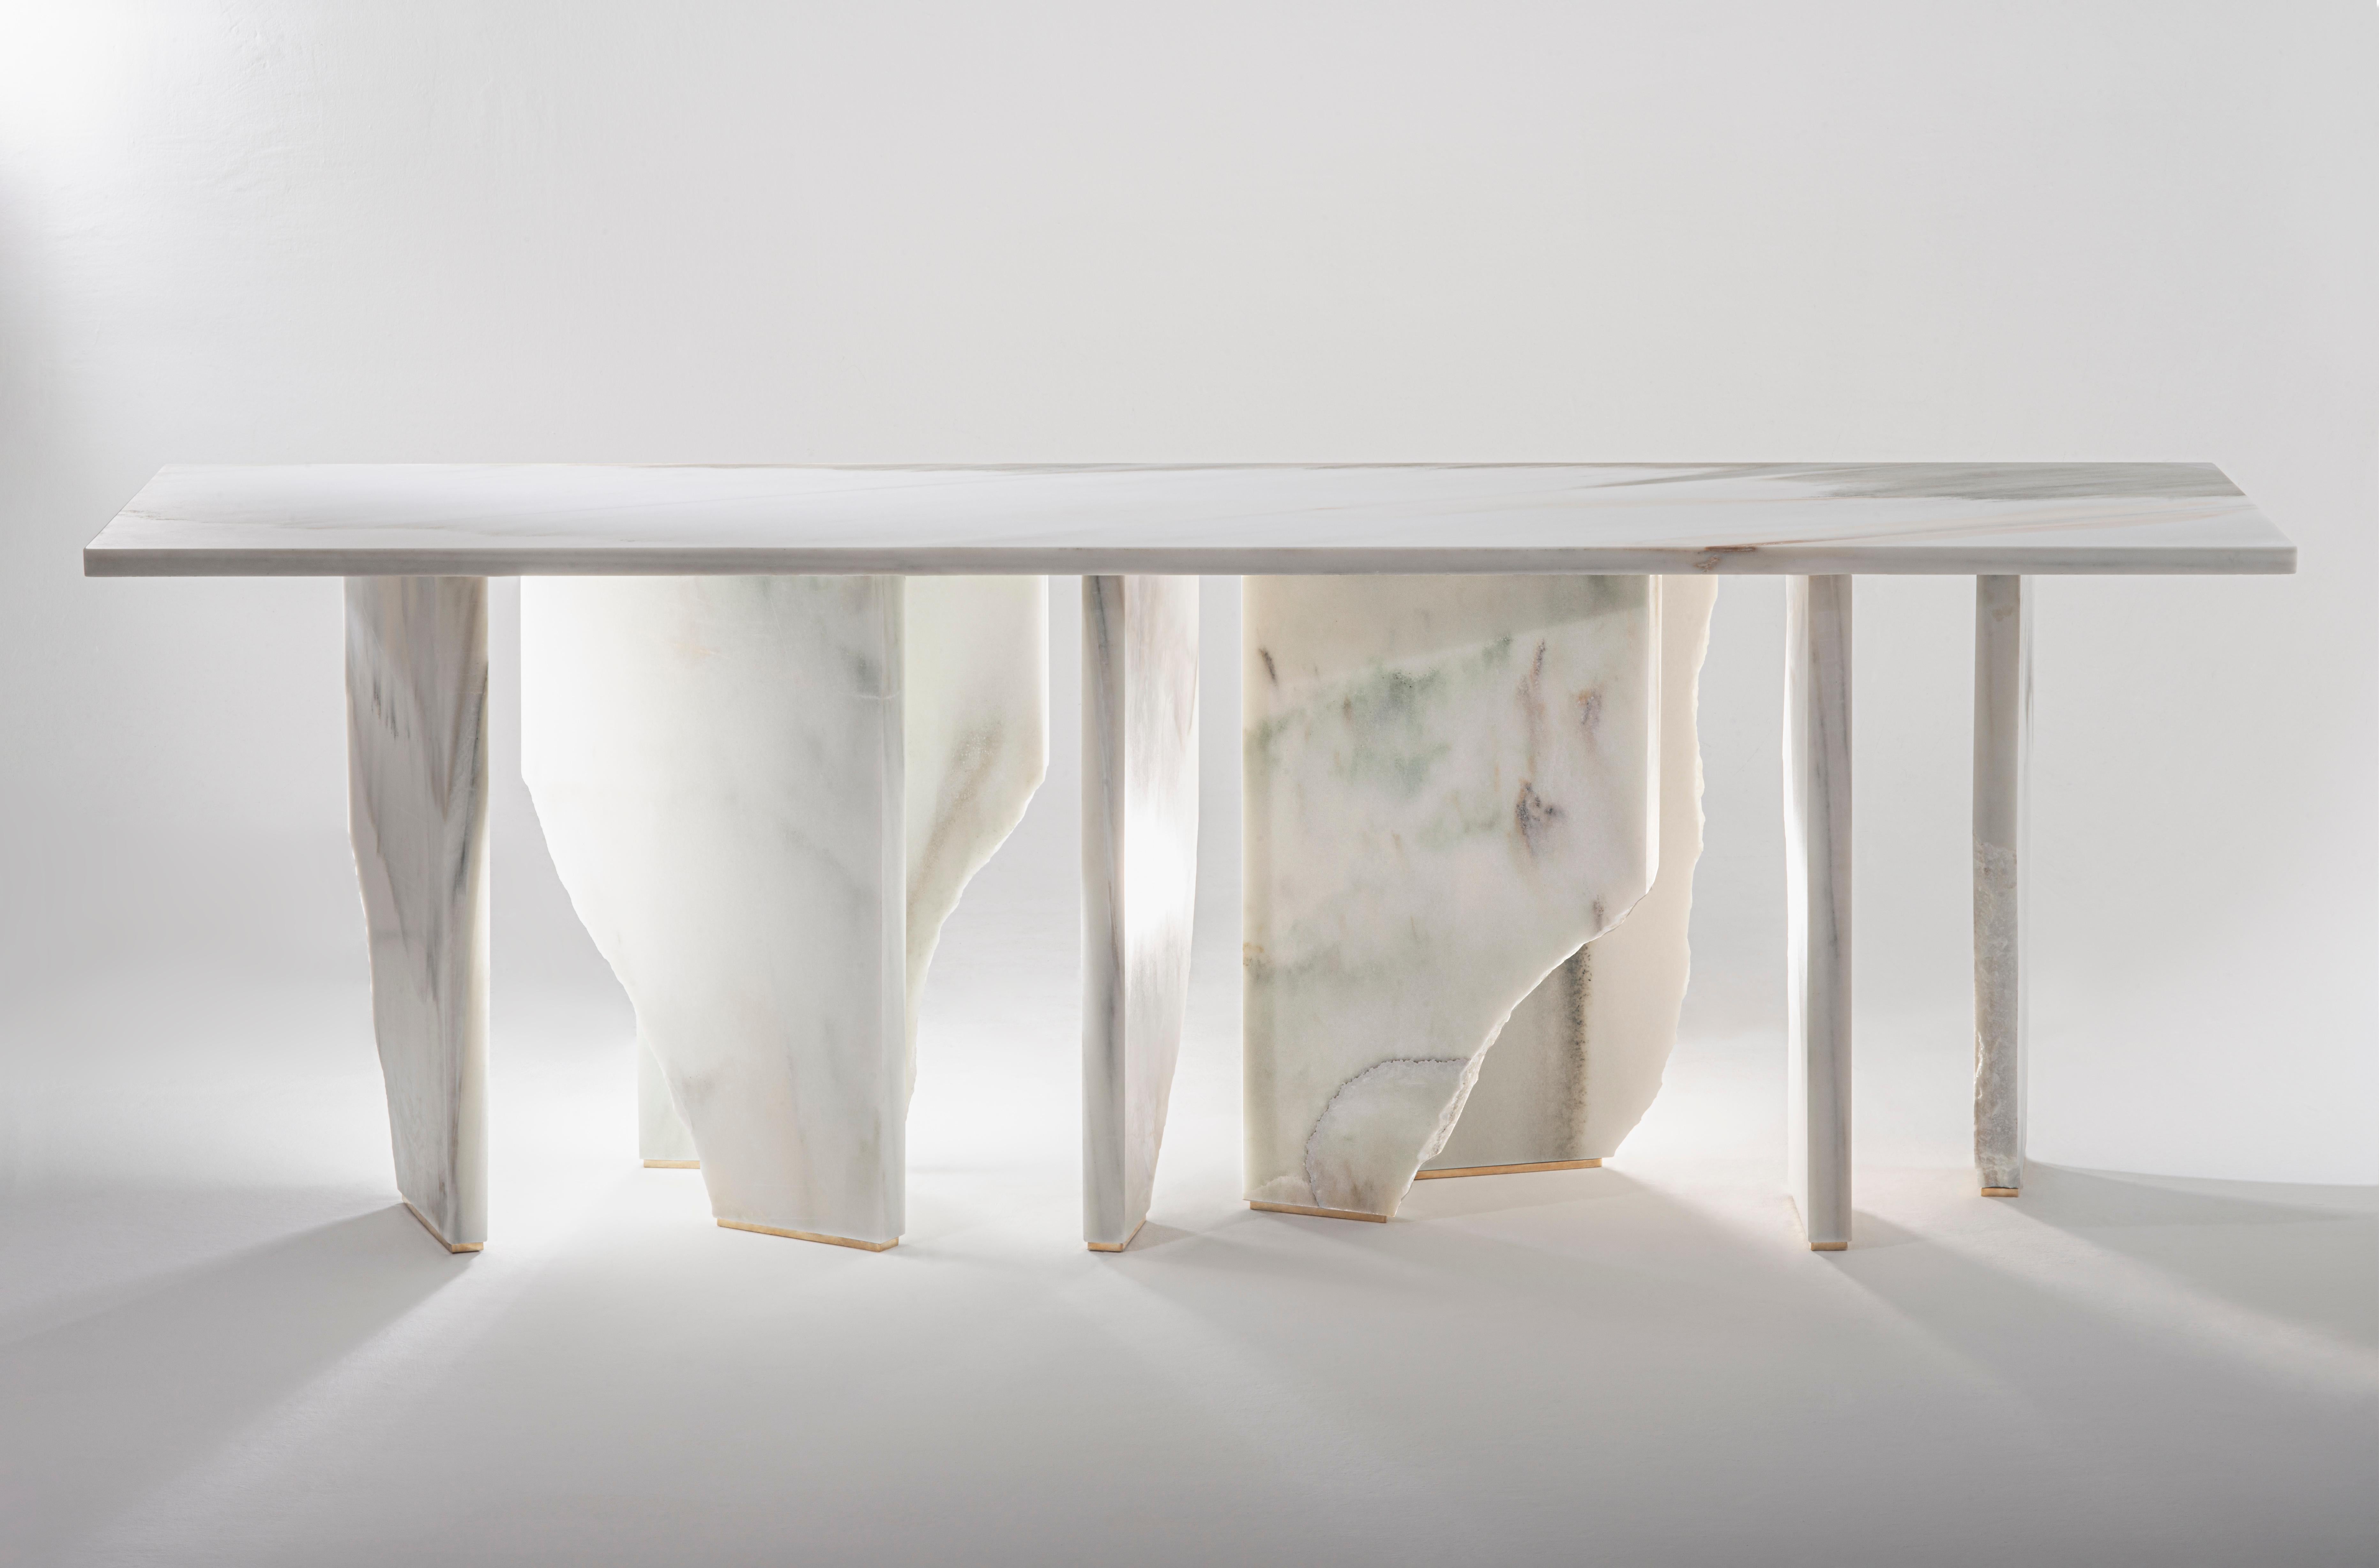 Like a monumental iceberg, the Arctic Console seems to float in the space. A unique piece made out of solid marble from the South of Spain, a warm land that provides, in appearance, this frozen stone. The stone – icy and crystalline - is letting the